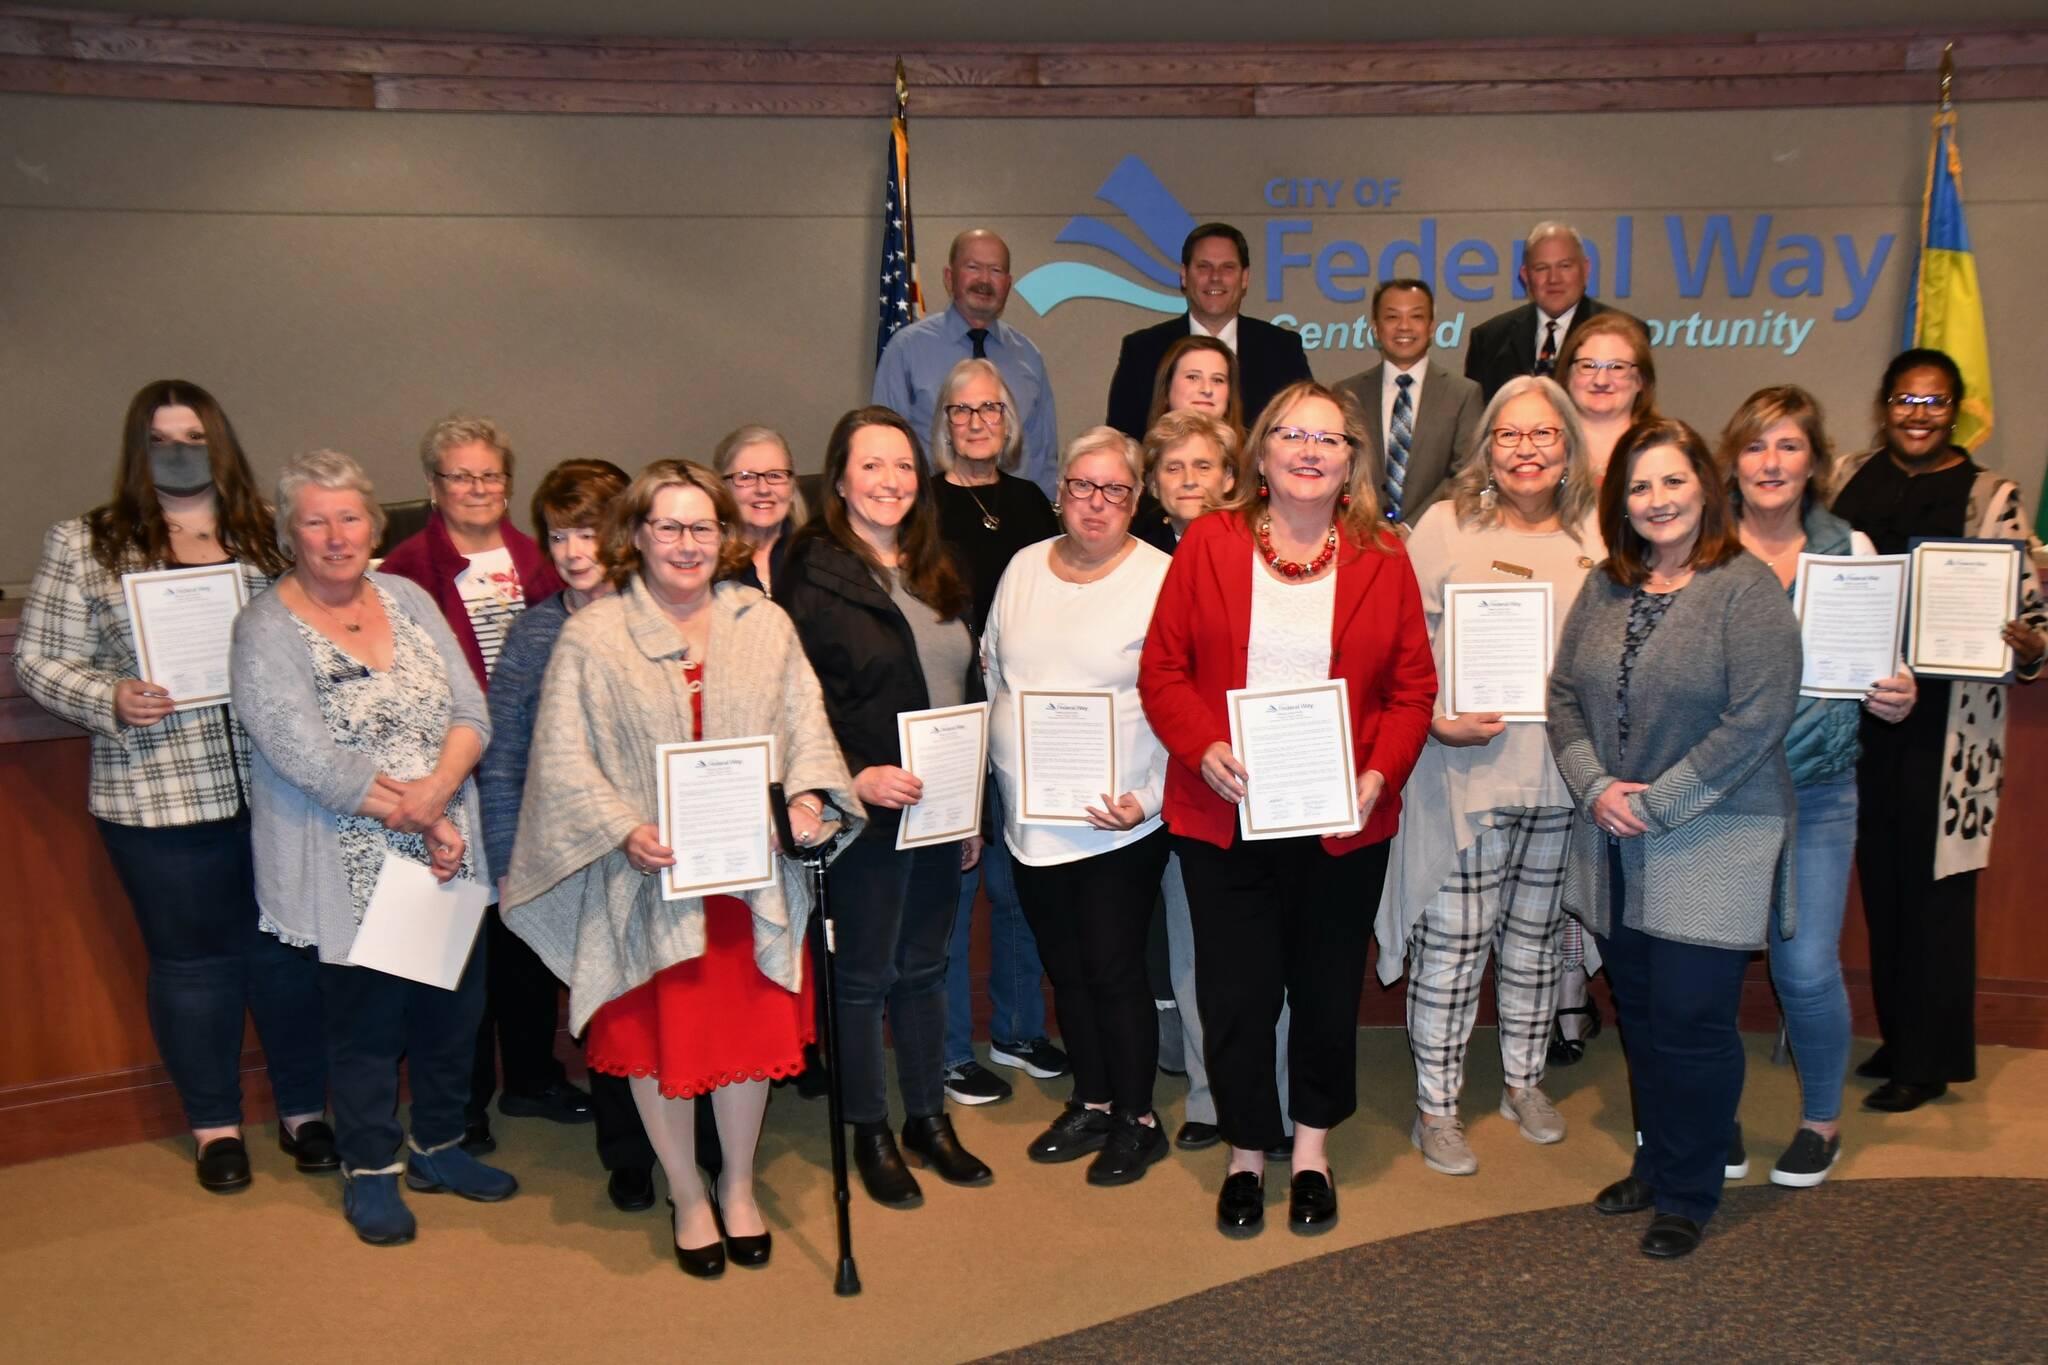 Photo by Bruce Honda
Numerous notable women in the Federal Way community stand for a picture as the city council honors Women’s History Month.